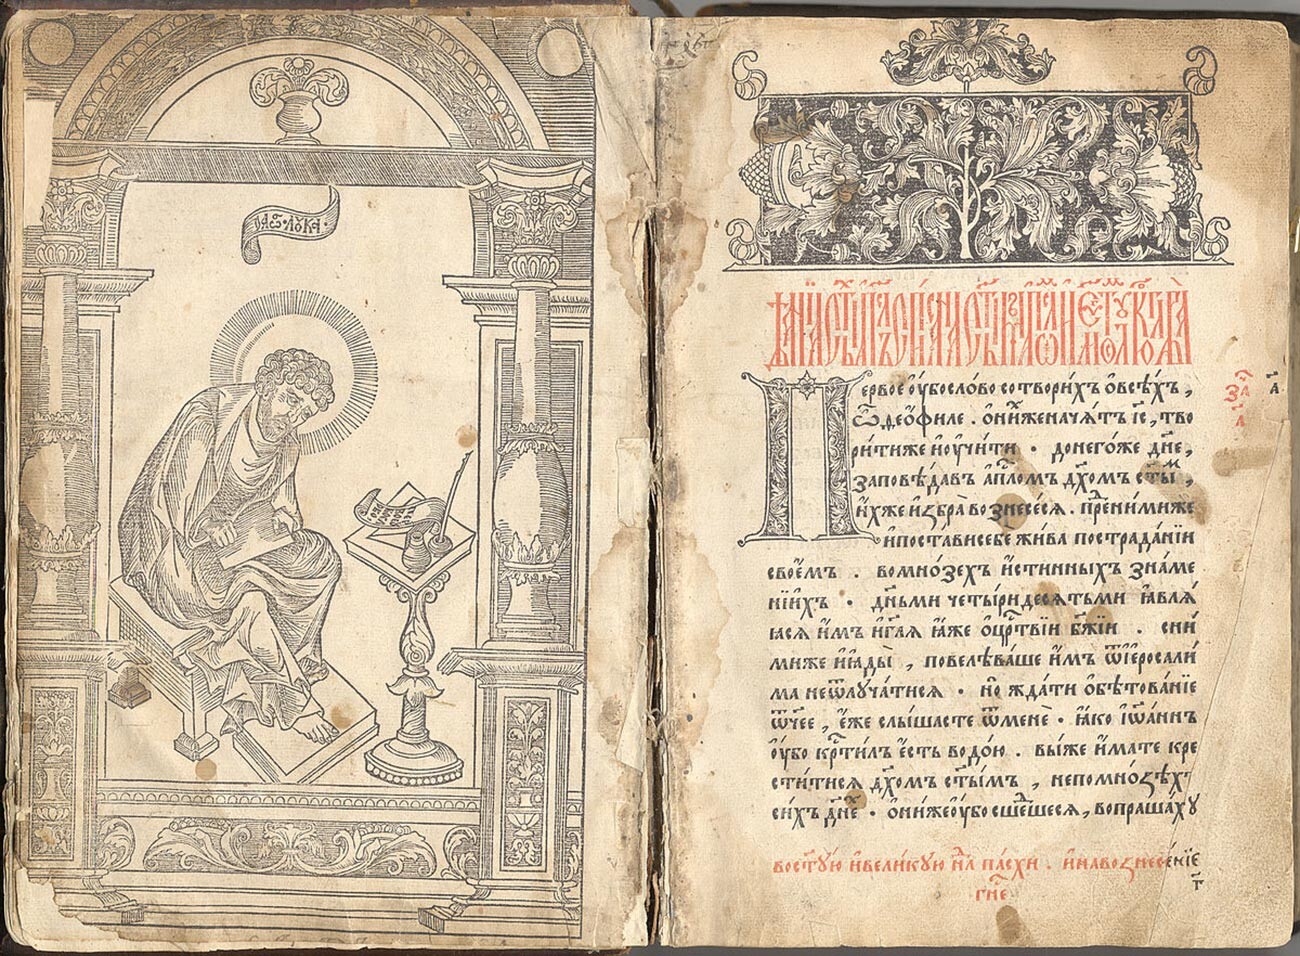 Front page of the first ever printed Russian book, Apostolos of 1564